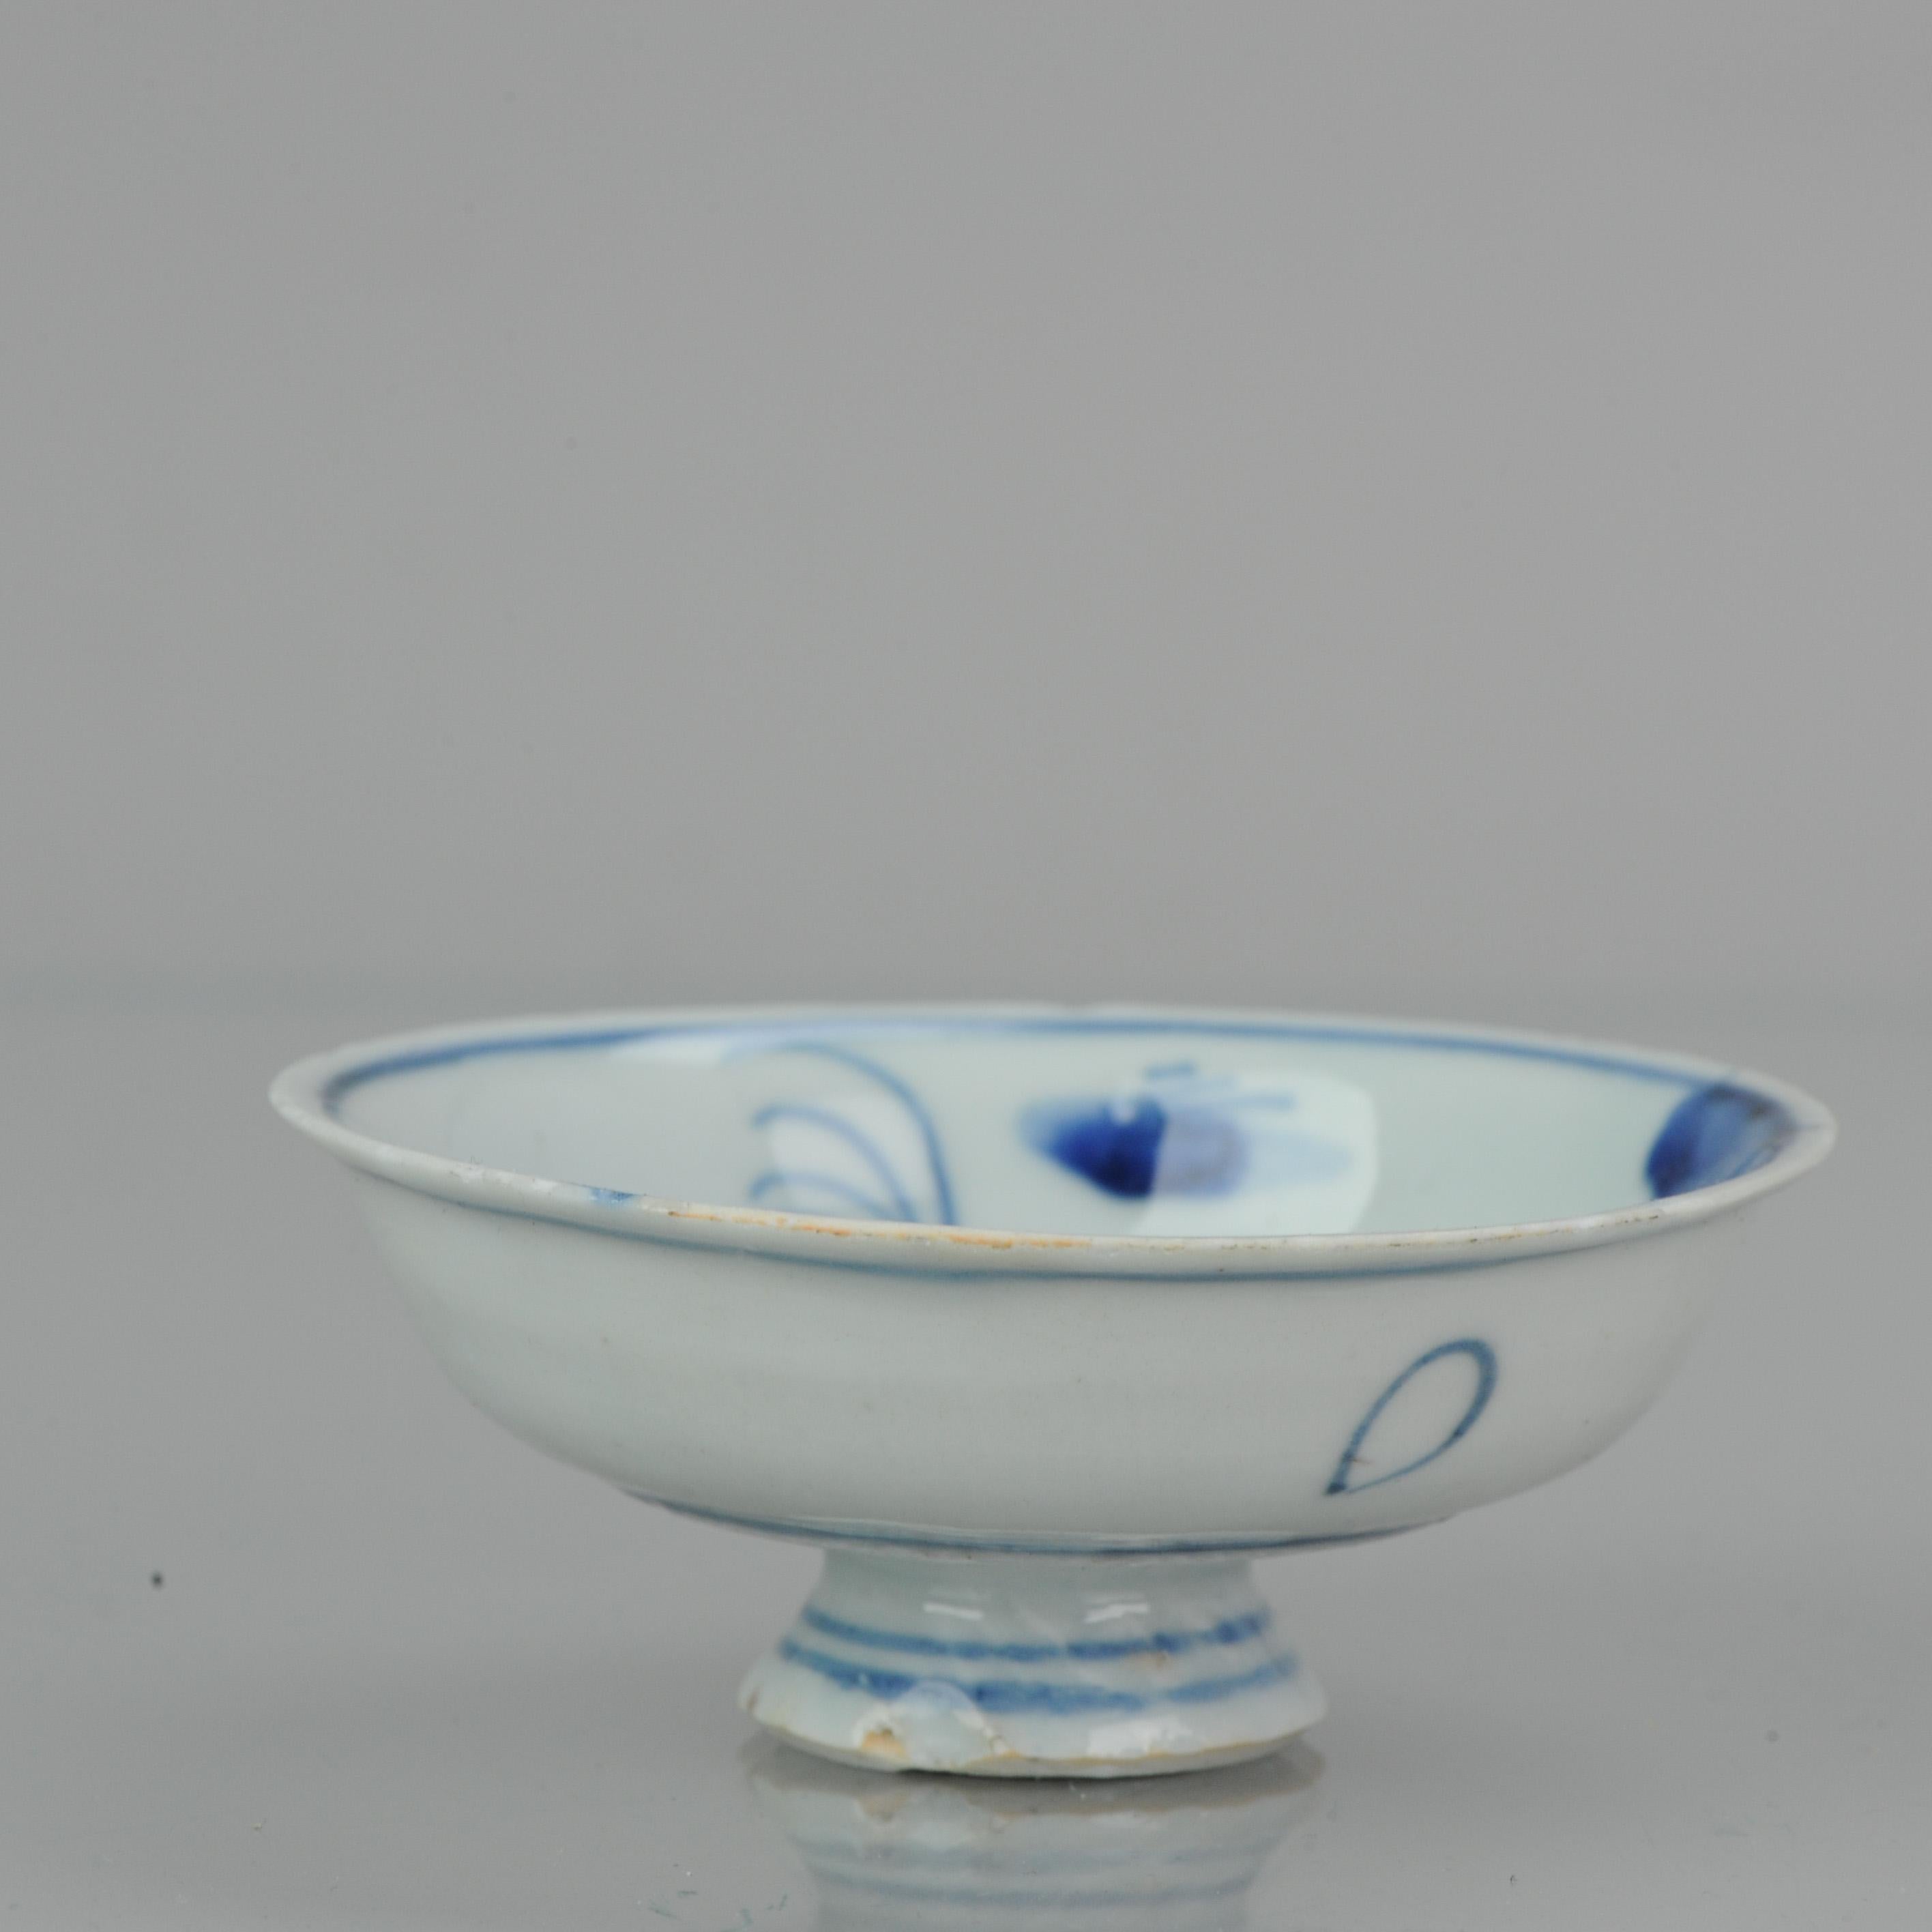 A rare piece. Late Ming for the Japanese market.

Additional information:
Material: Porcelain & Pottery
Region of Origin: China
Period: 17th century Transitional (1620 - 1661)
Age: Pre-1800
Condition: small fritting/mushikui and 1 flint to rim. also